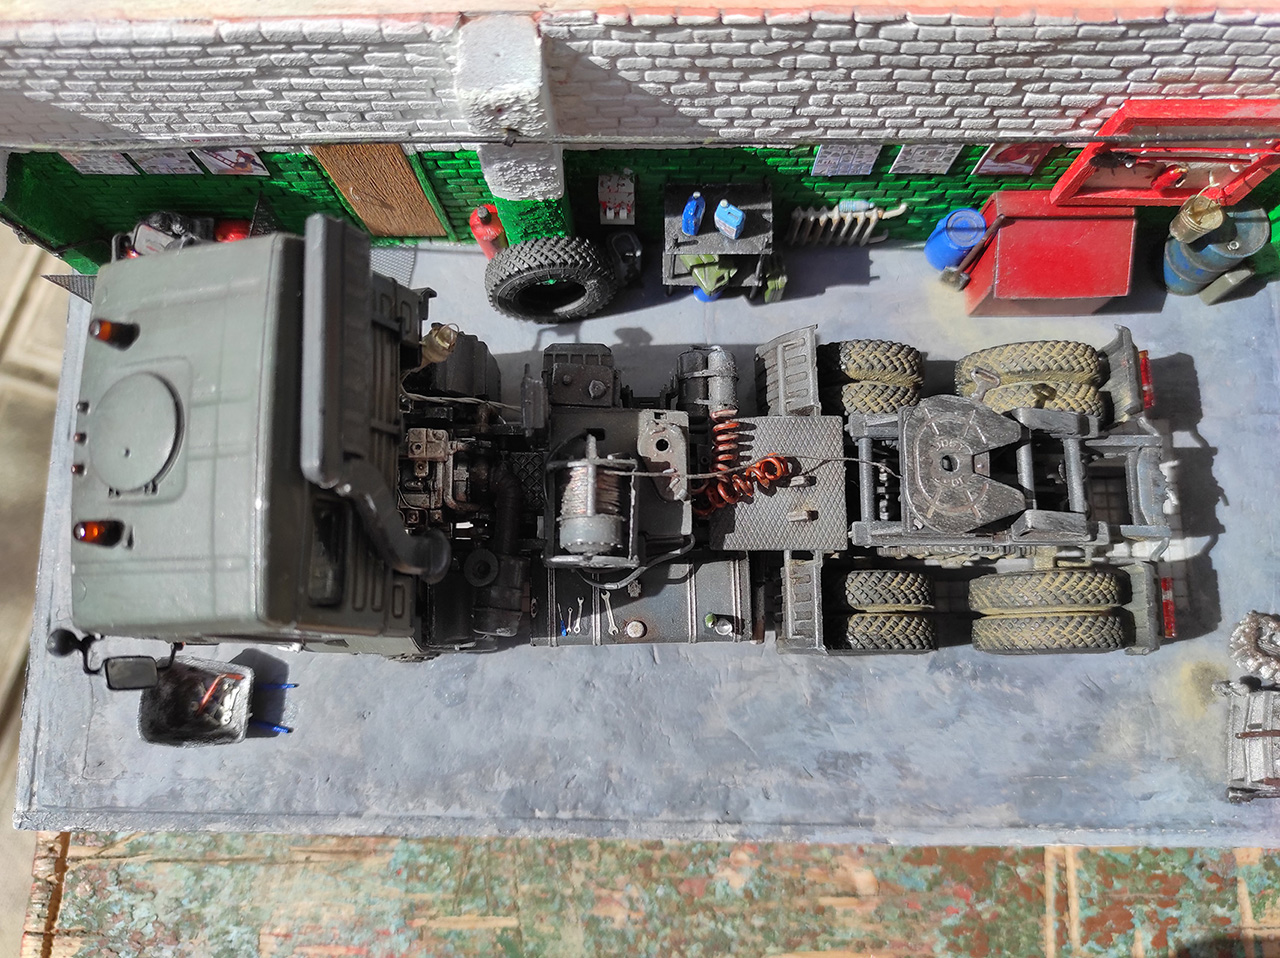 Dioramas and Vignettes: In the garage, photo #7